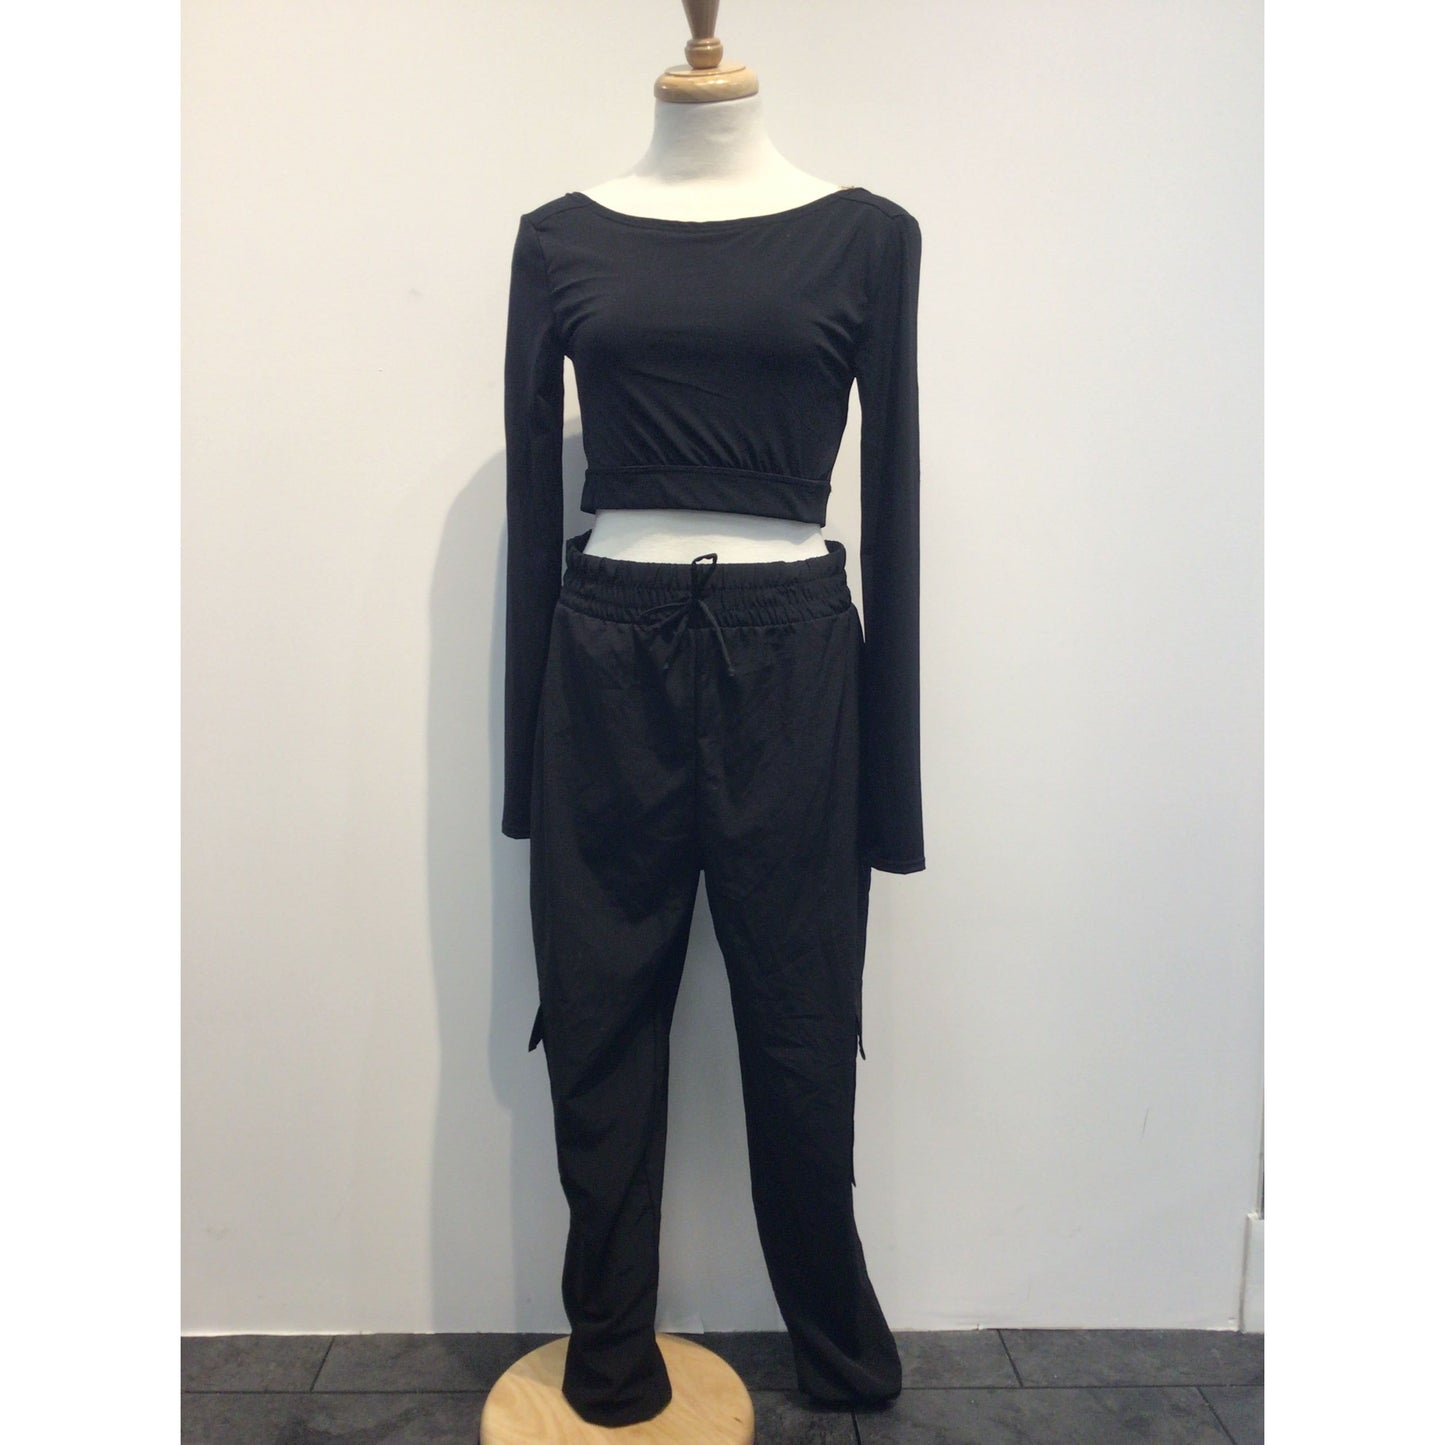 Black Crop Top and Contemporary Pants